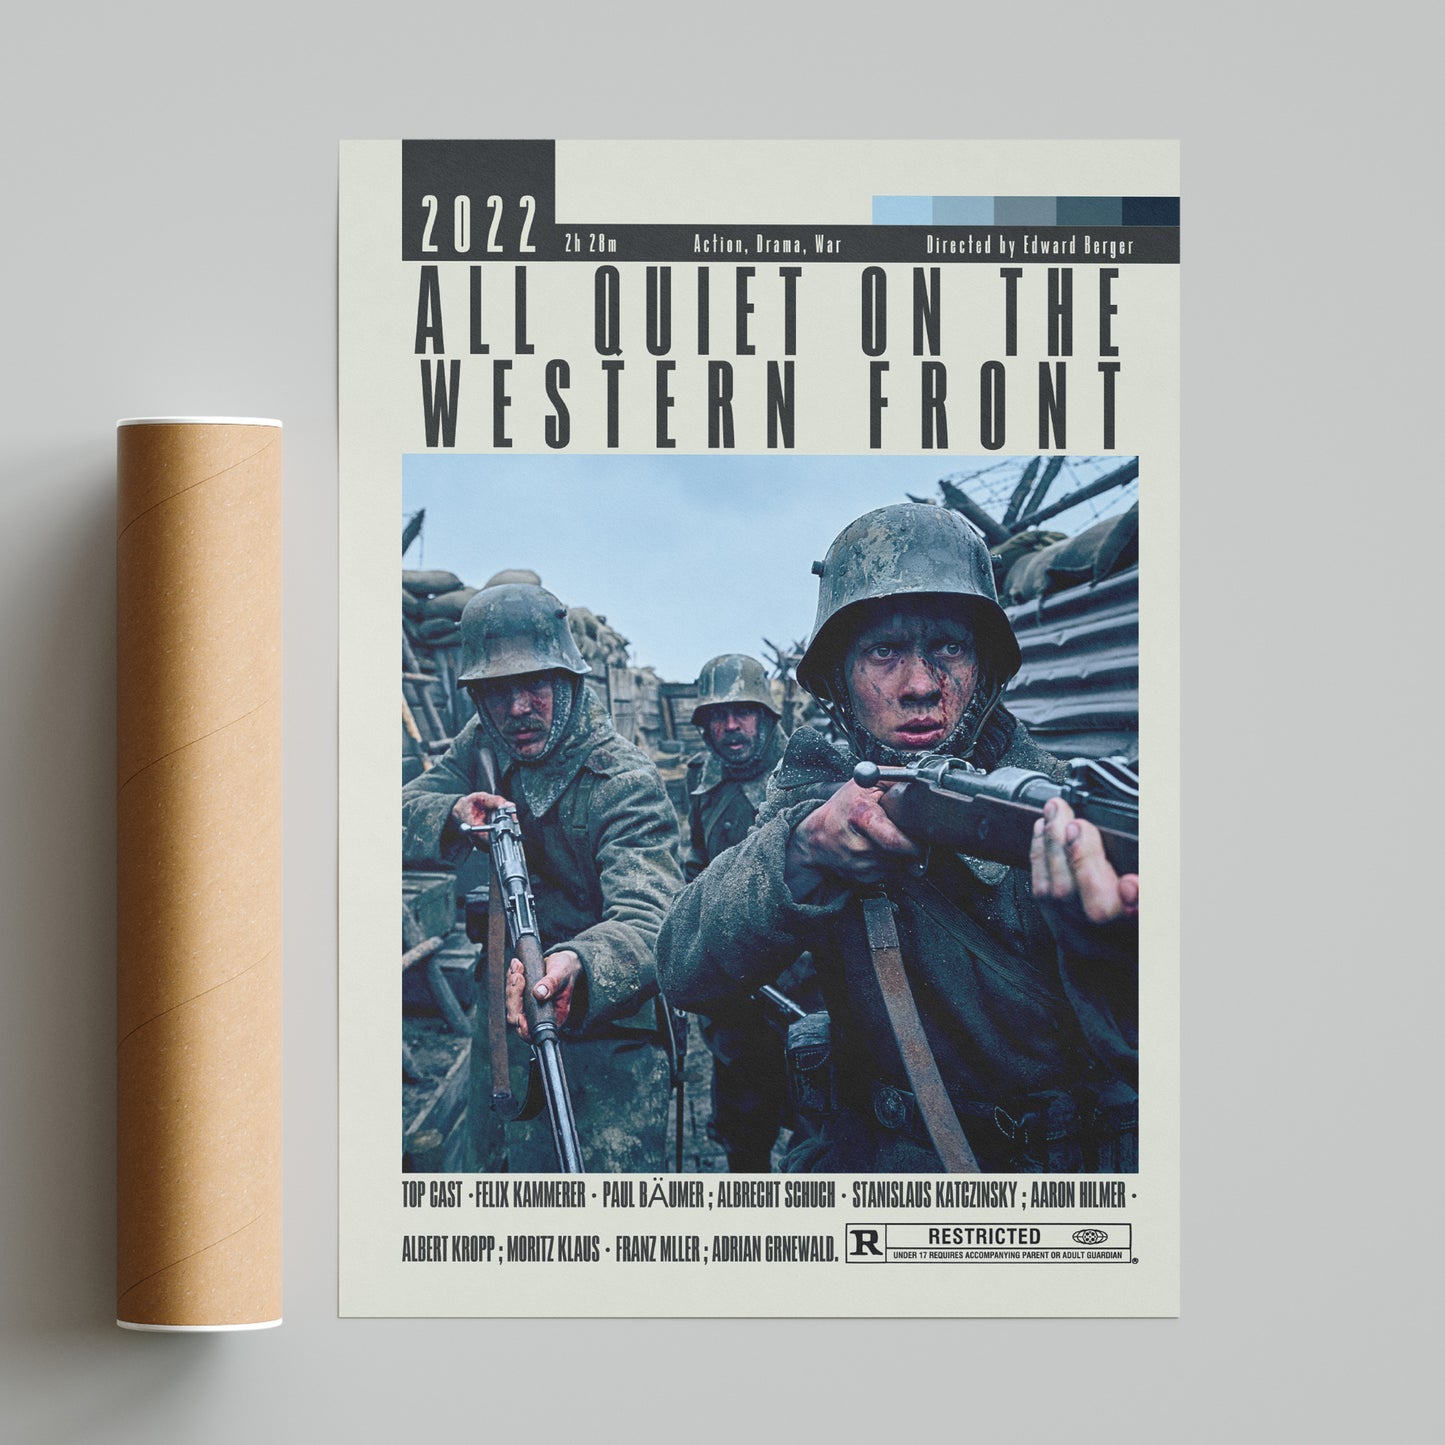 Experience the iconic and timeless story of "All Quiet on the Western Front" with our custom movie posters. These minimalist, vintage-inspired prints come in 98 different types, ranging from A6 to A3 in size. Featuring the top cast, director, and famous scenes, these posters are a must-have for any movie fan or collector. Add them to your wall art decor and relive the best movie of all time.